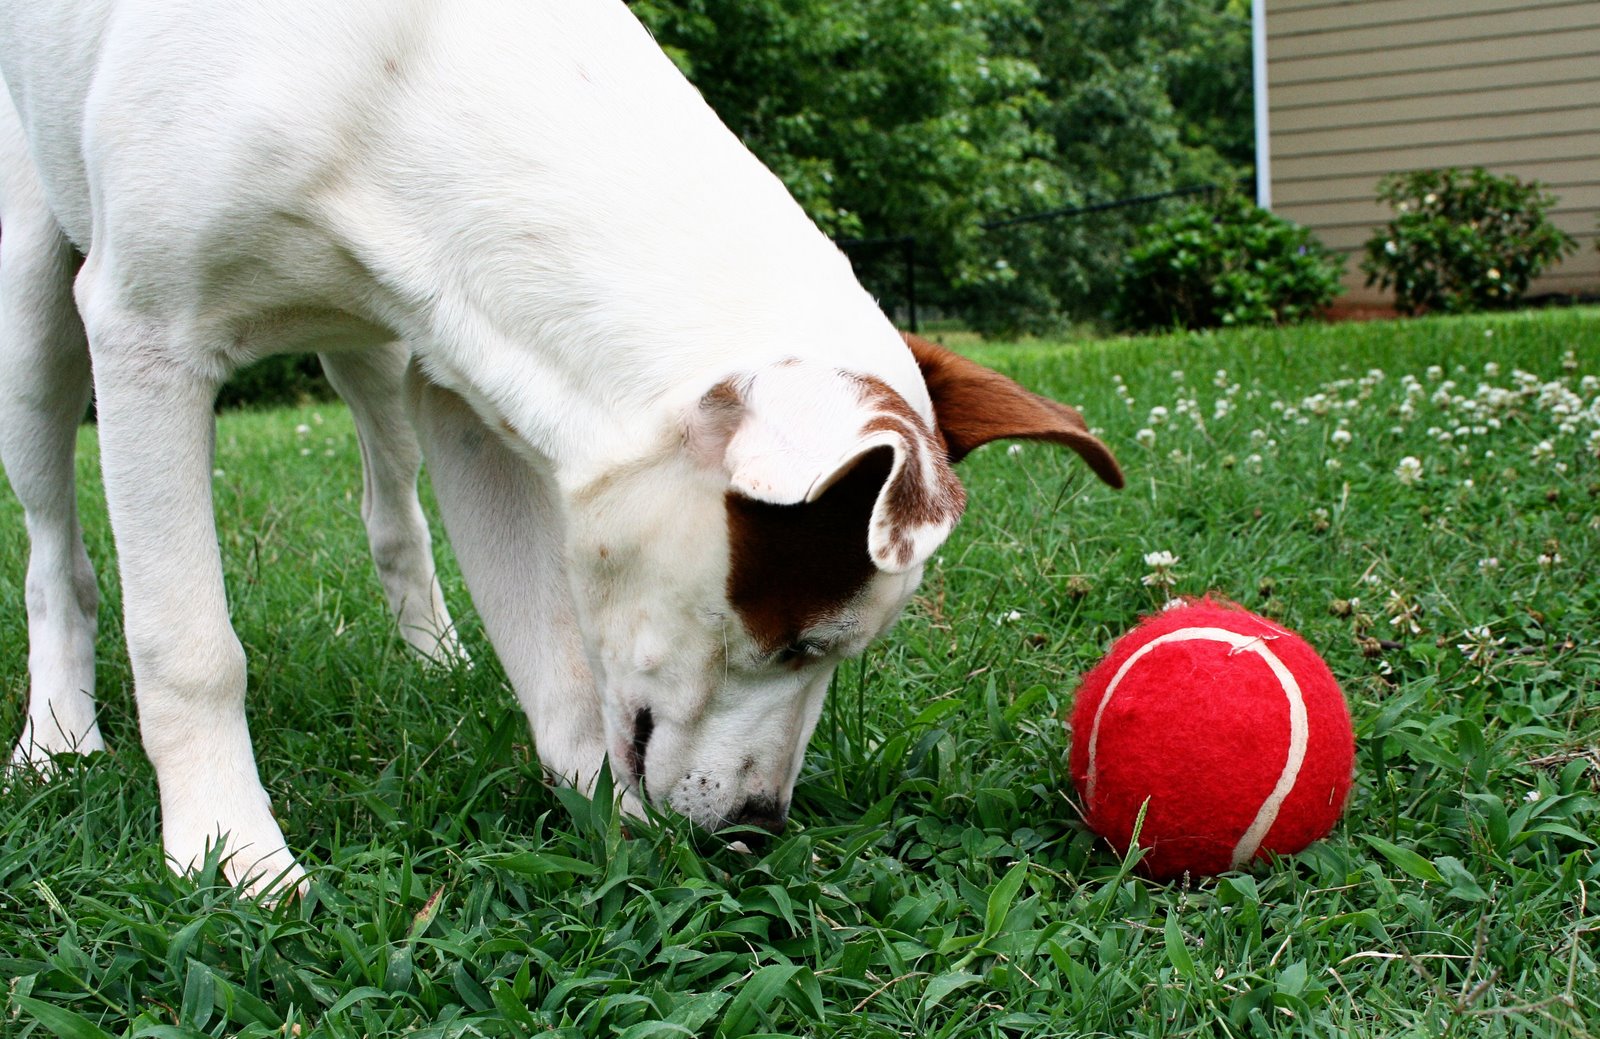 [Lucy+Red+Ball+2.jpg]